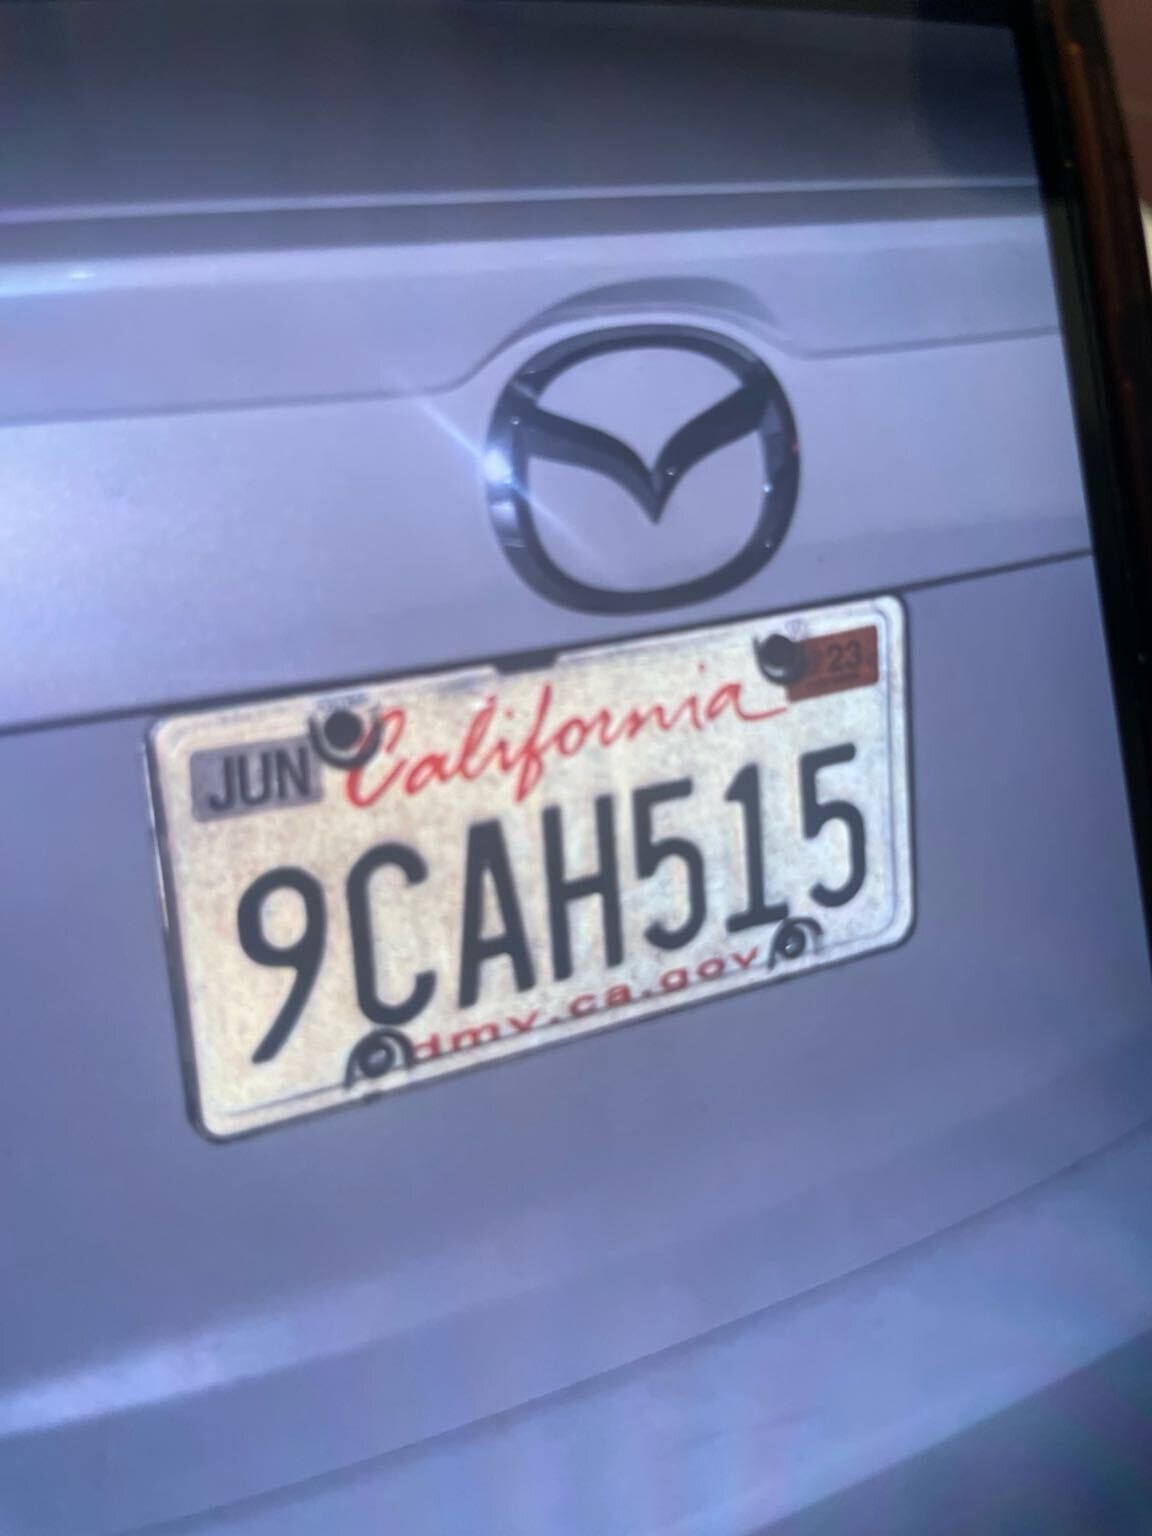 Photo of car in the street with license plate 9CAH515 in California